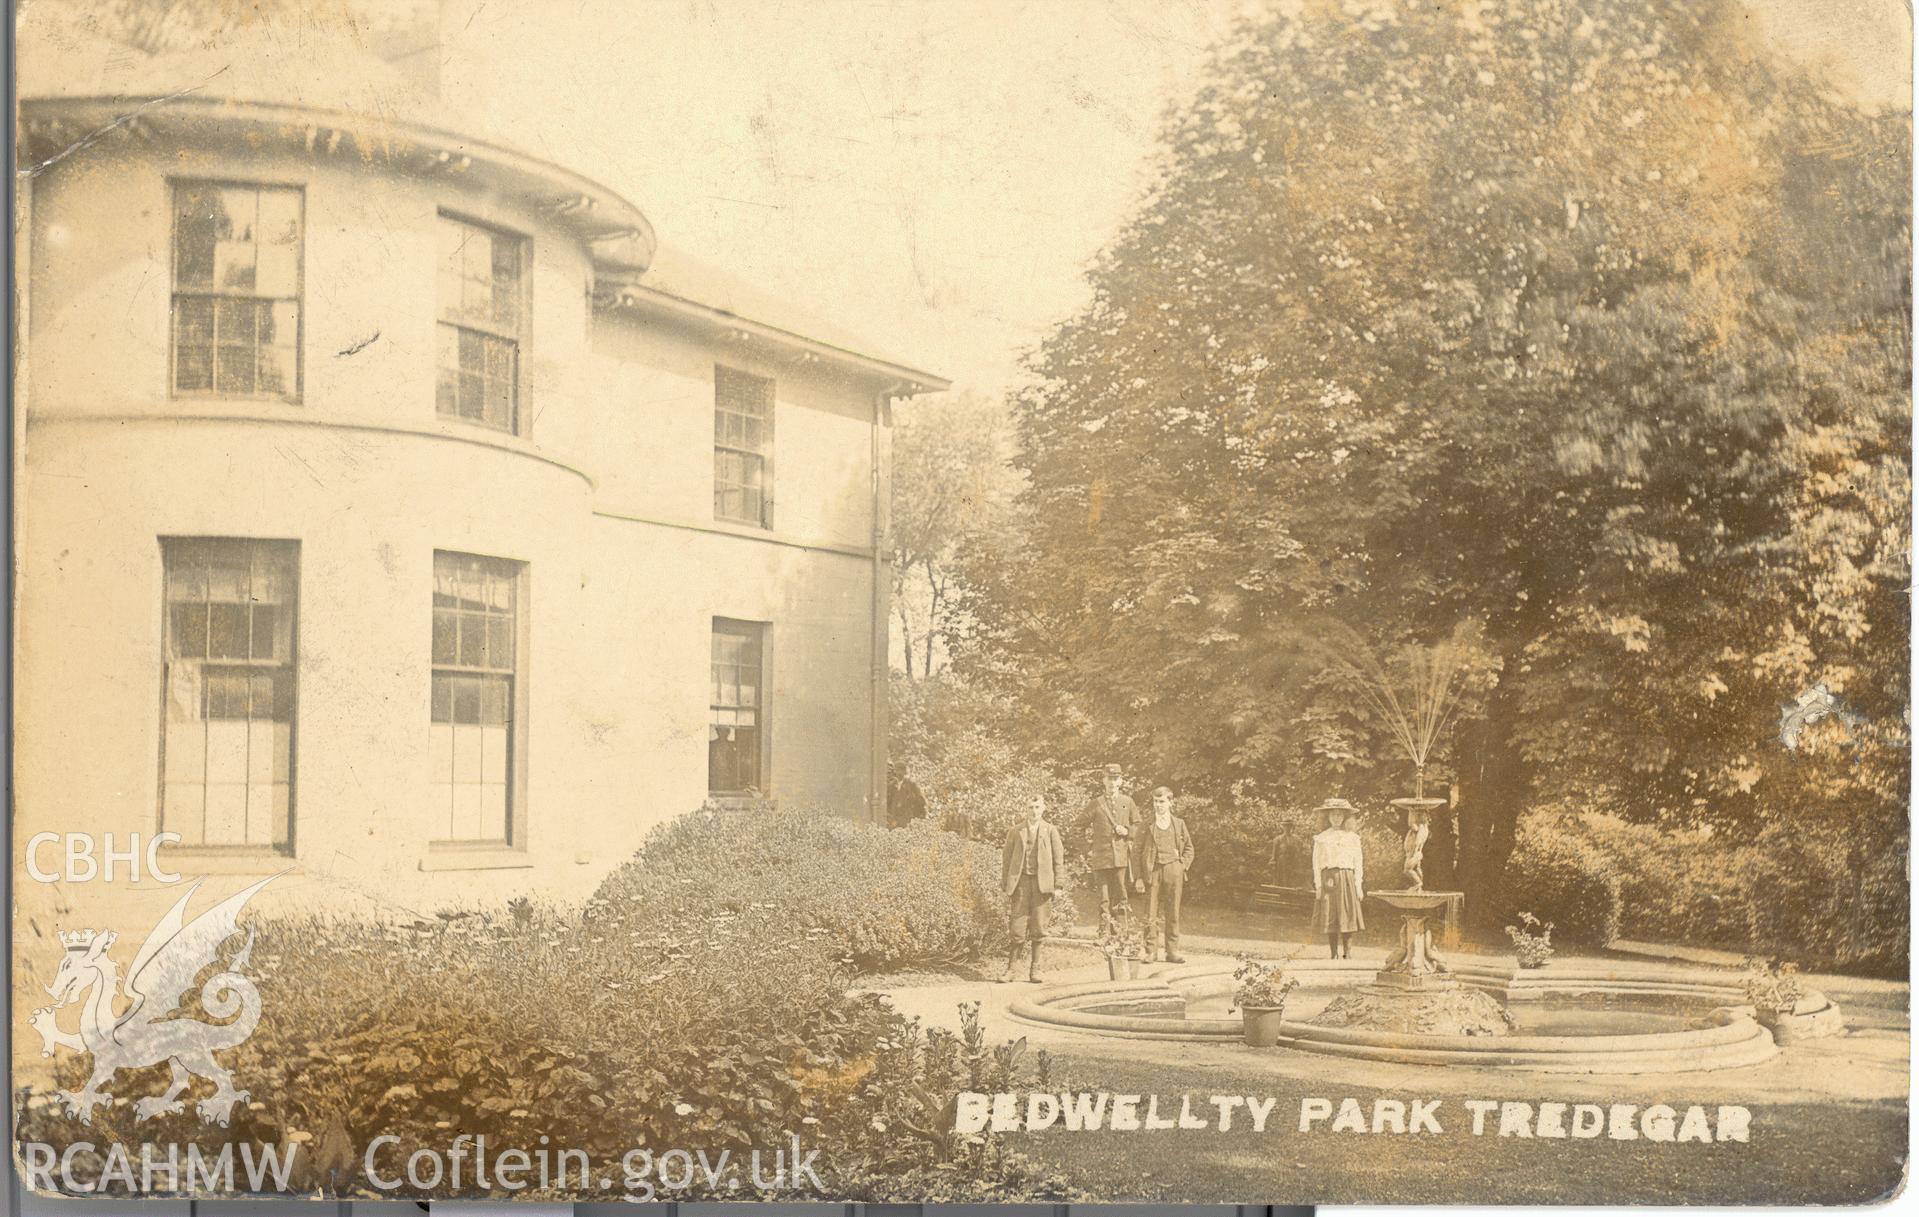 Digitised postcard image of Bedwellty House, Tredegar, including figures, Eastment & Son Artists, Ebbw Vale. Produced by Parks and Gardens Data Services, from an original item in the Peter Davis Collection at Parks and Gardens UK. We hold only web-resolution images of this collection, suitable for viewing on screen and for research purposes only. We do not hold the original images, or publication quality scans.